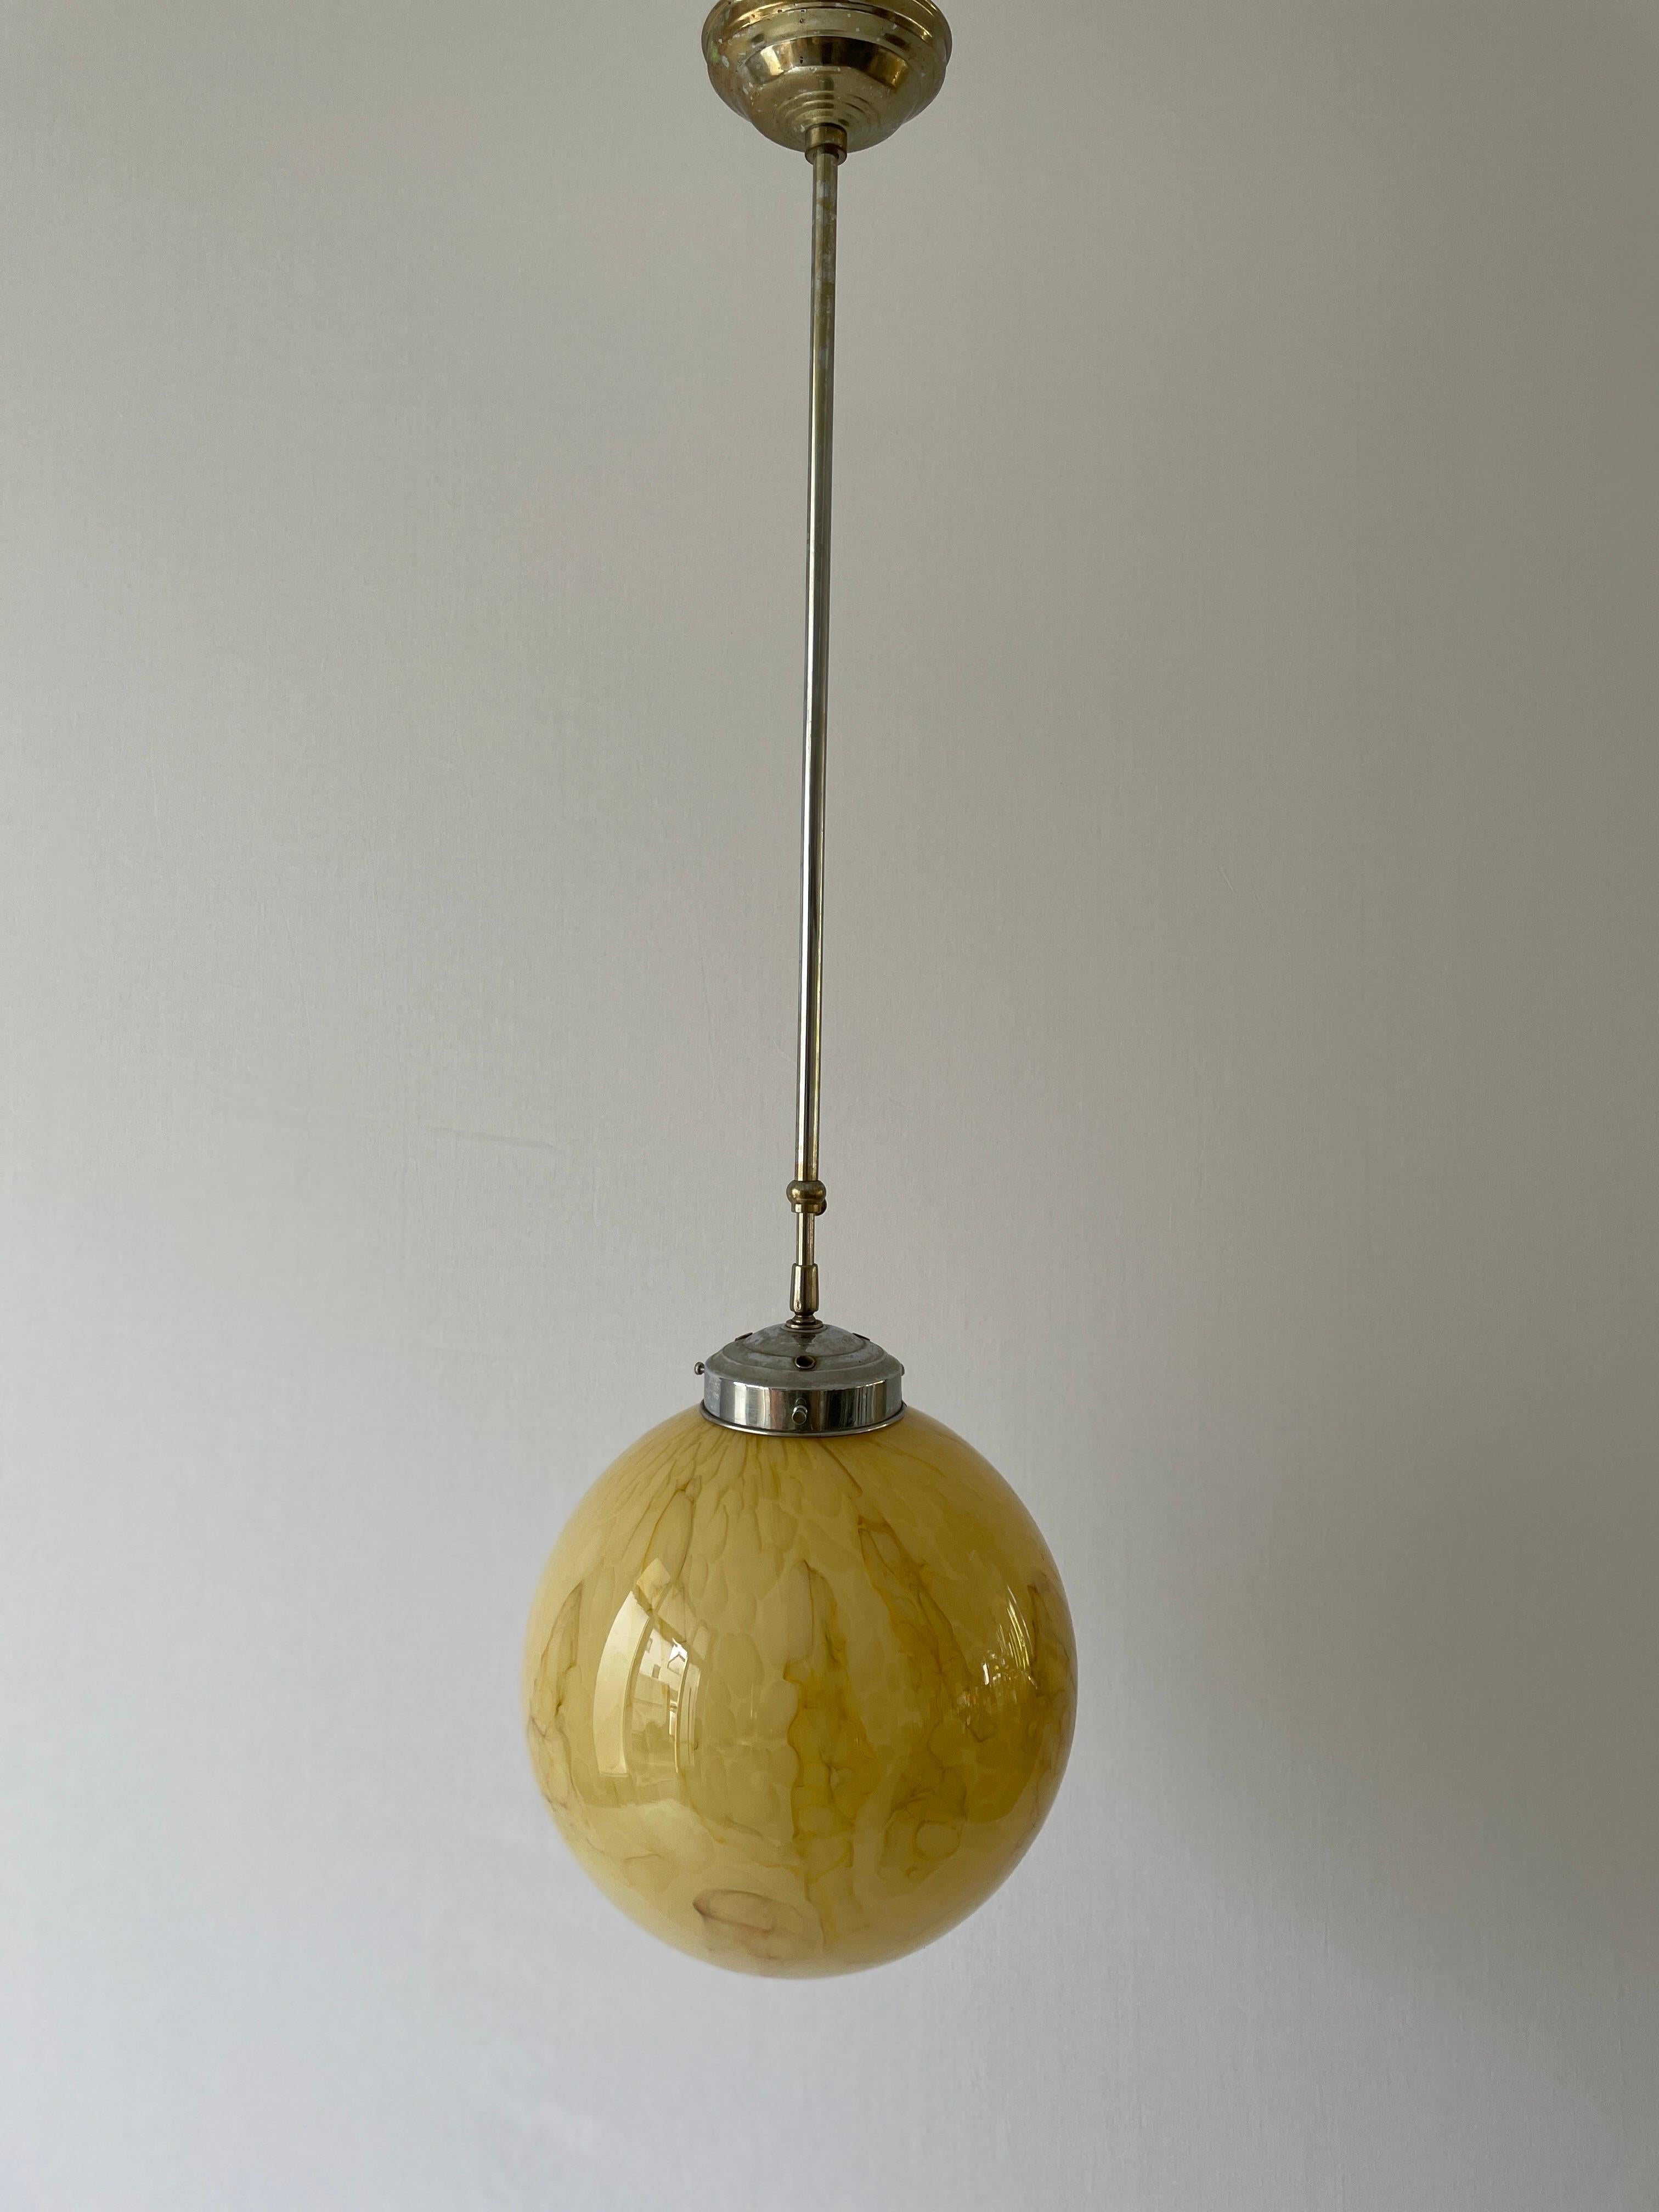 Brass Art Deco Exceptional Church Lamp with Yellow Glass Ball , 1930s, Germany For Sale